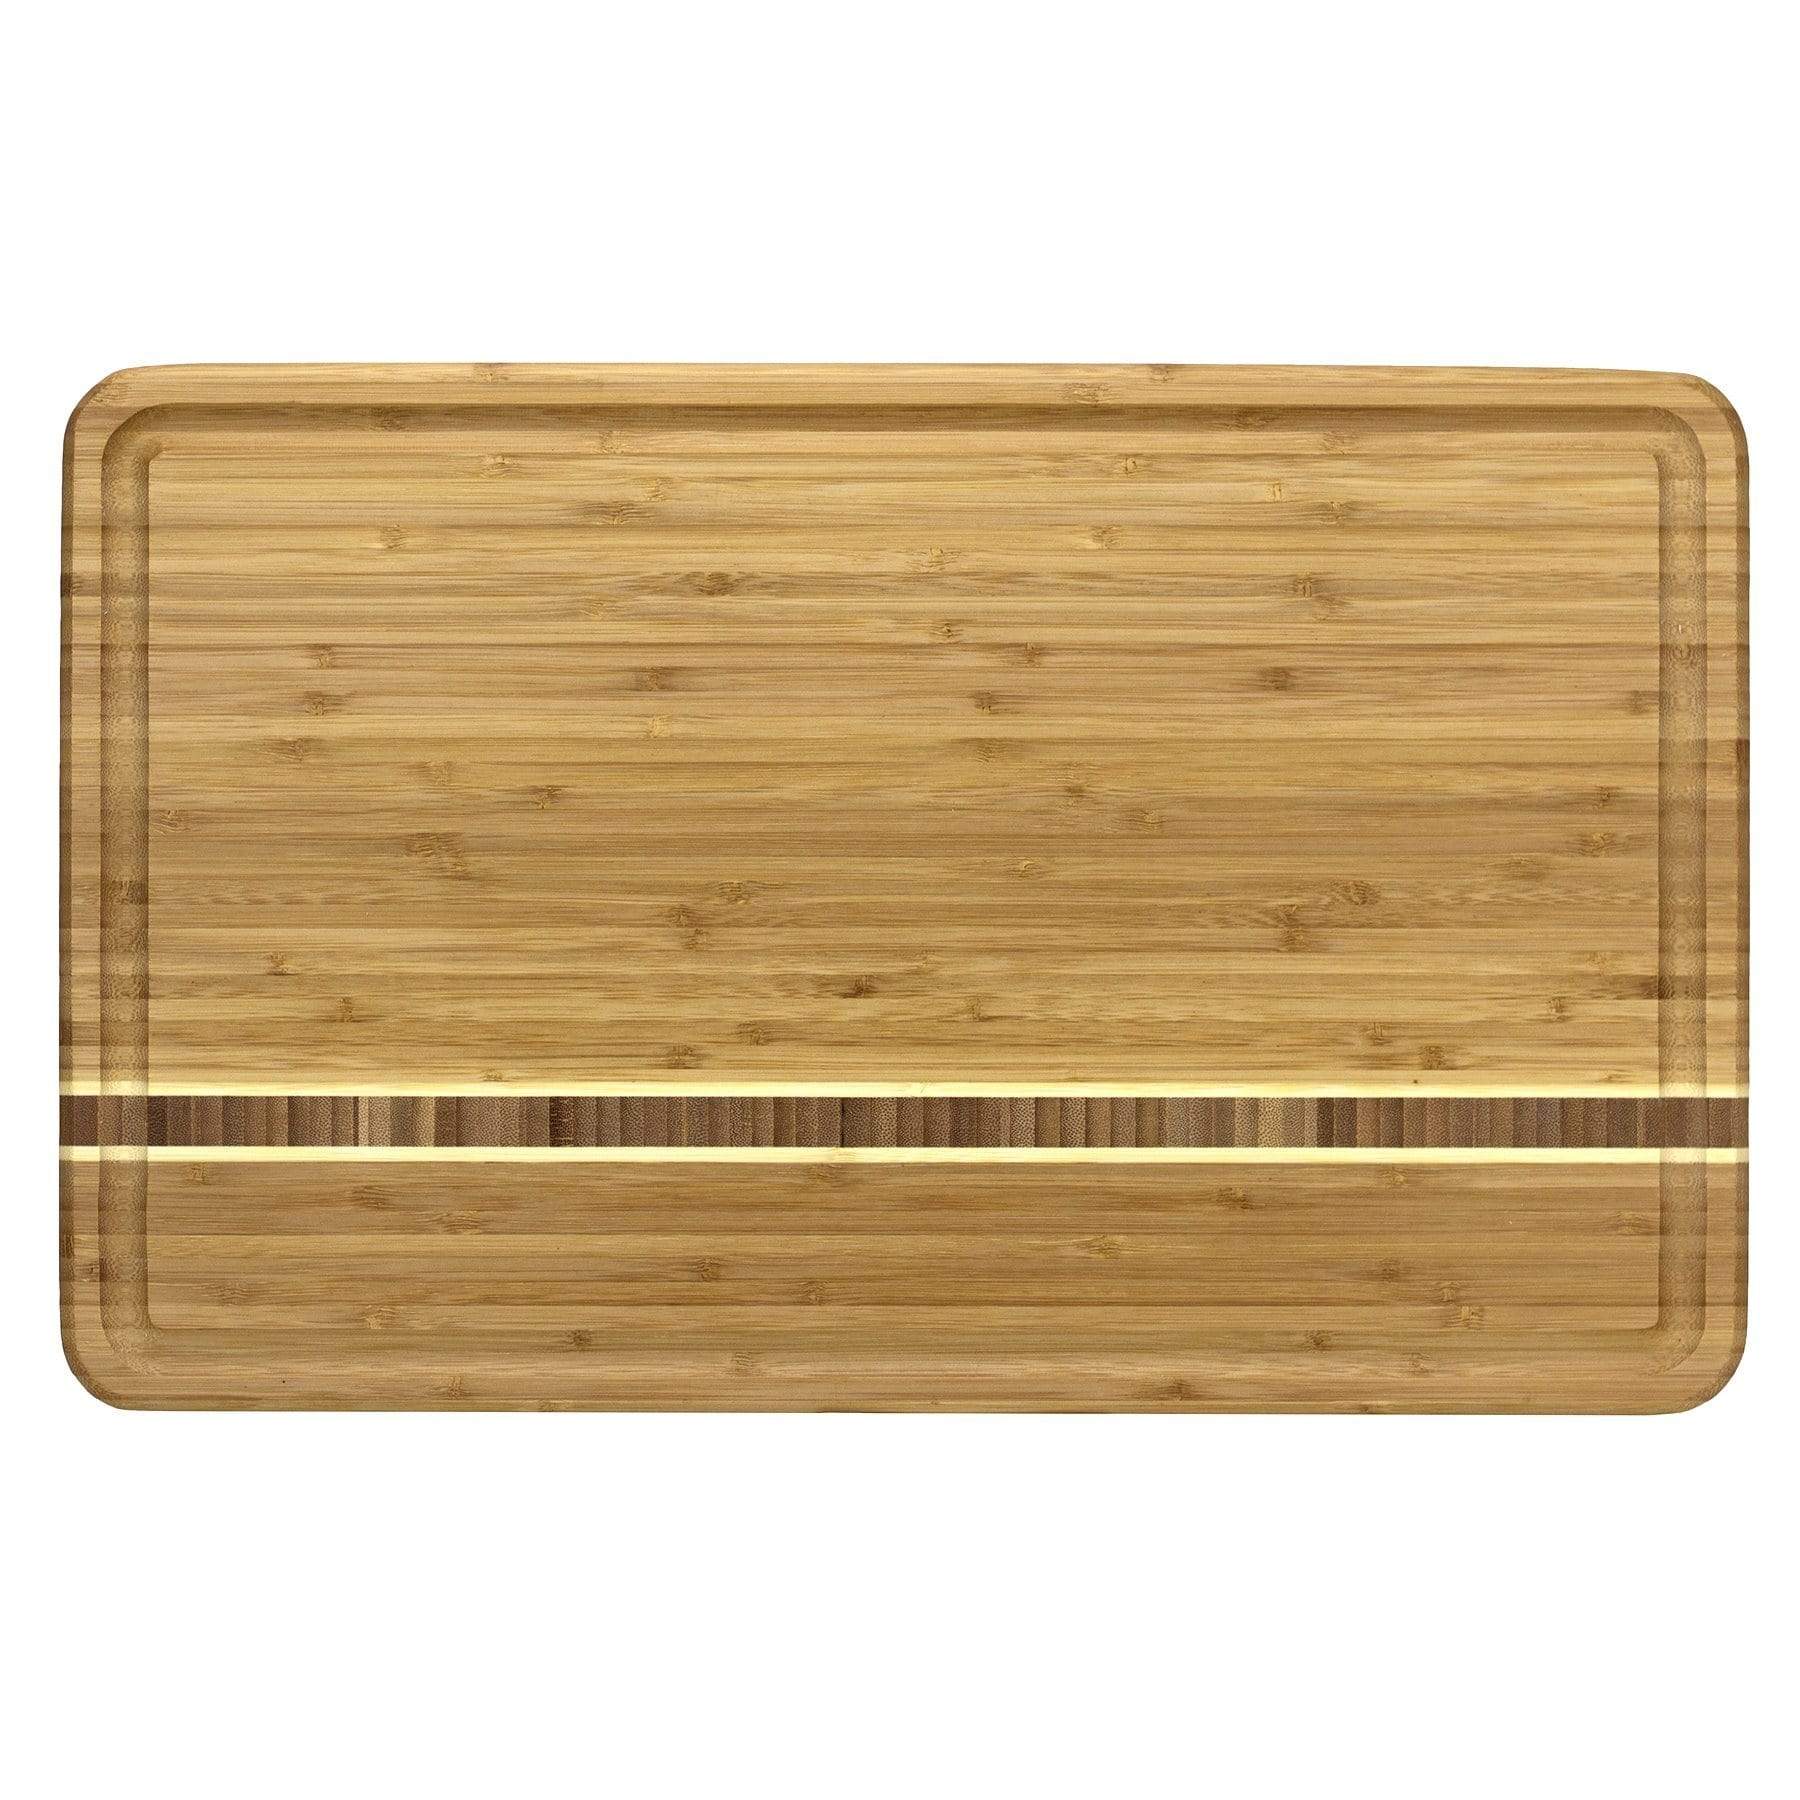 Totally Bamboo Dominica Carving Board, 20-5/8" x 12-1/2"